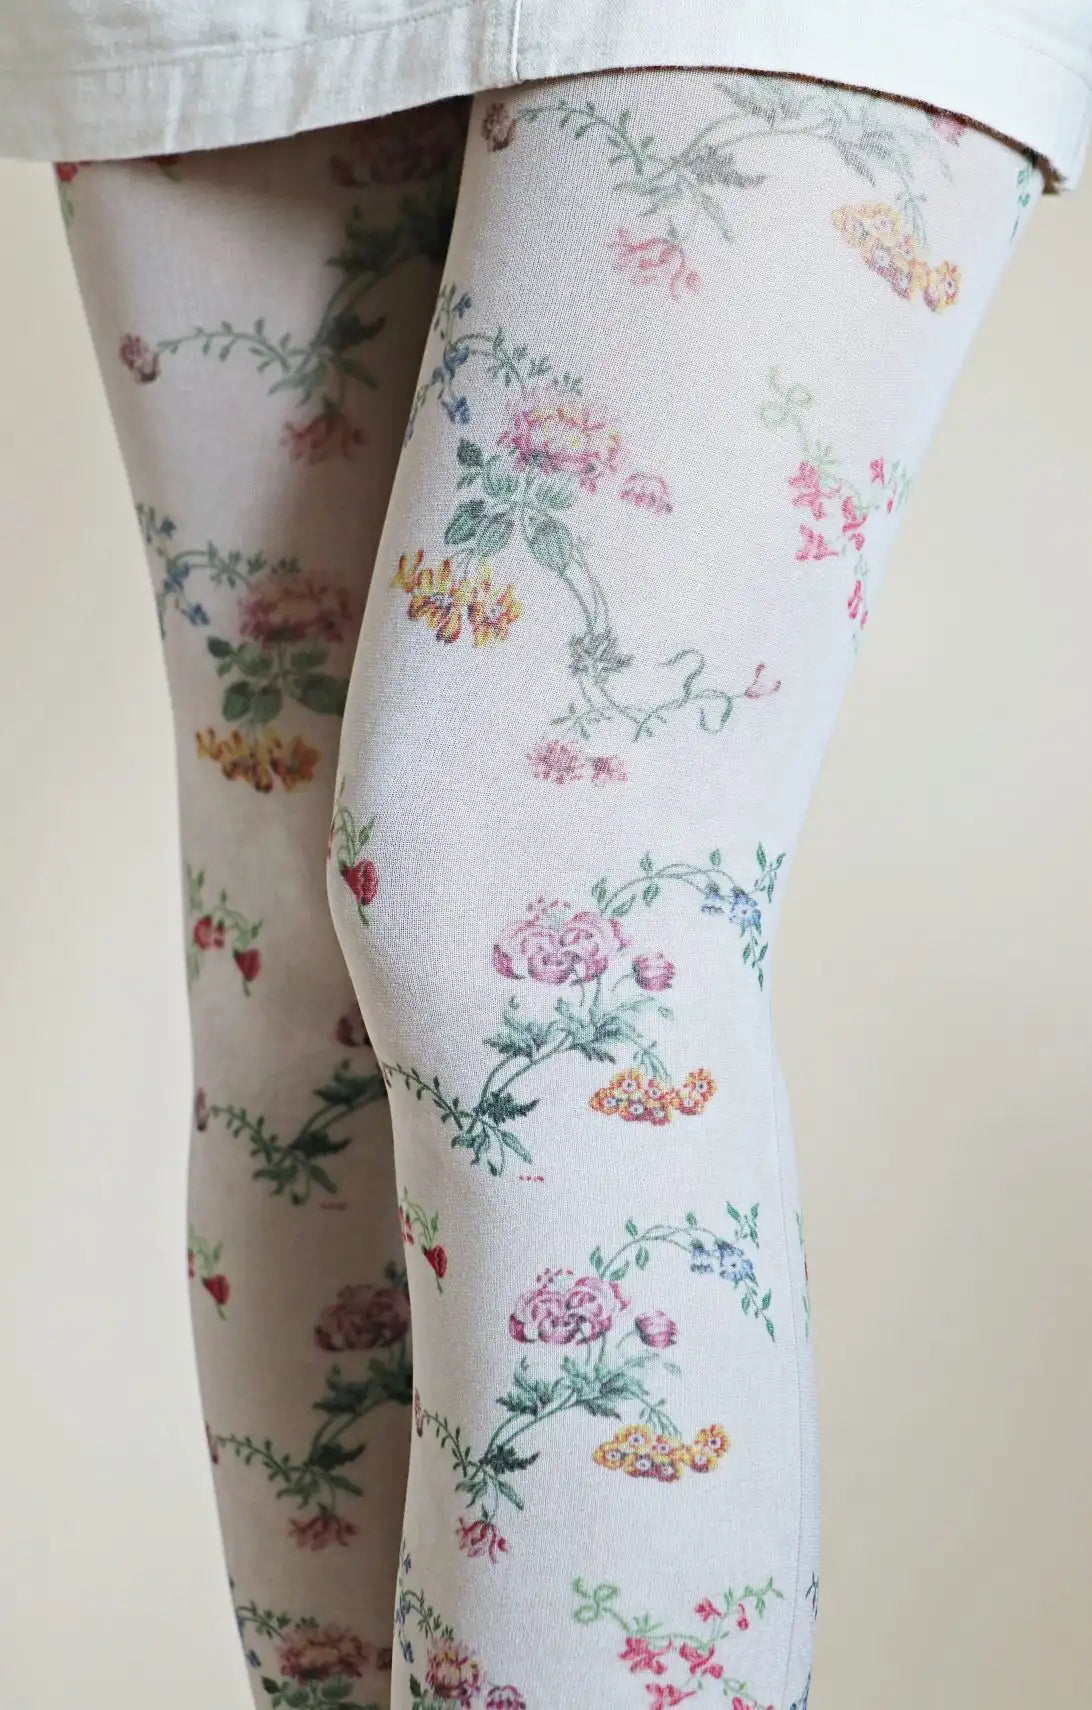 Overall whitish fabric with a small floral pattern throughout the tights.